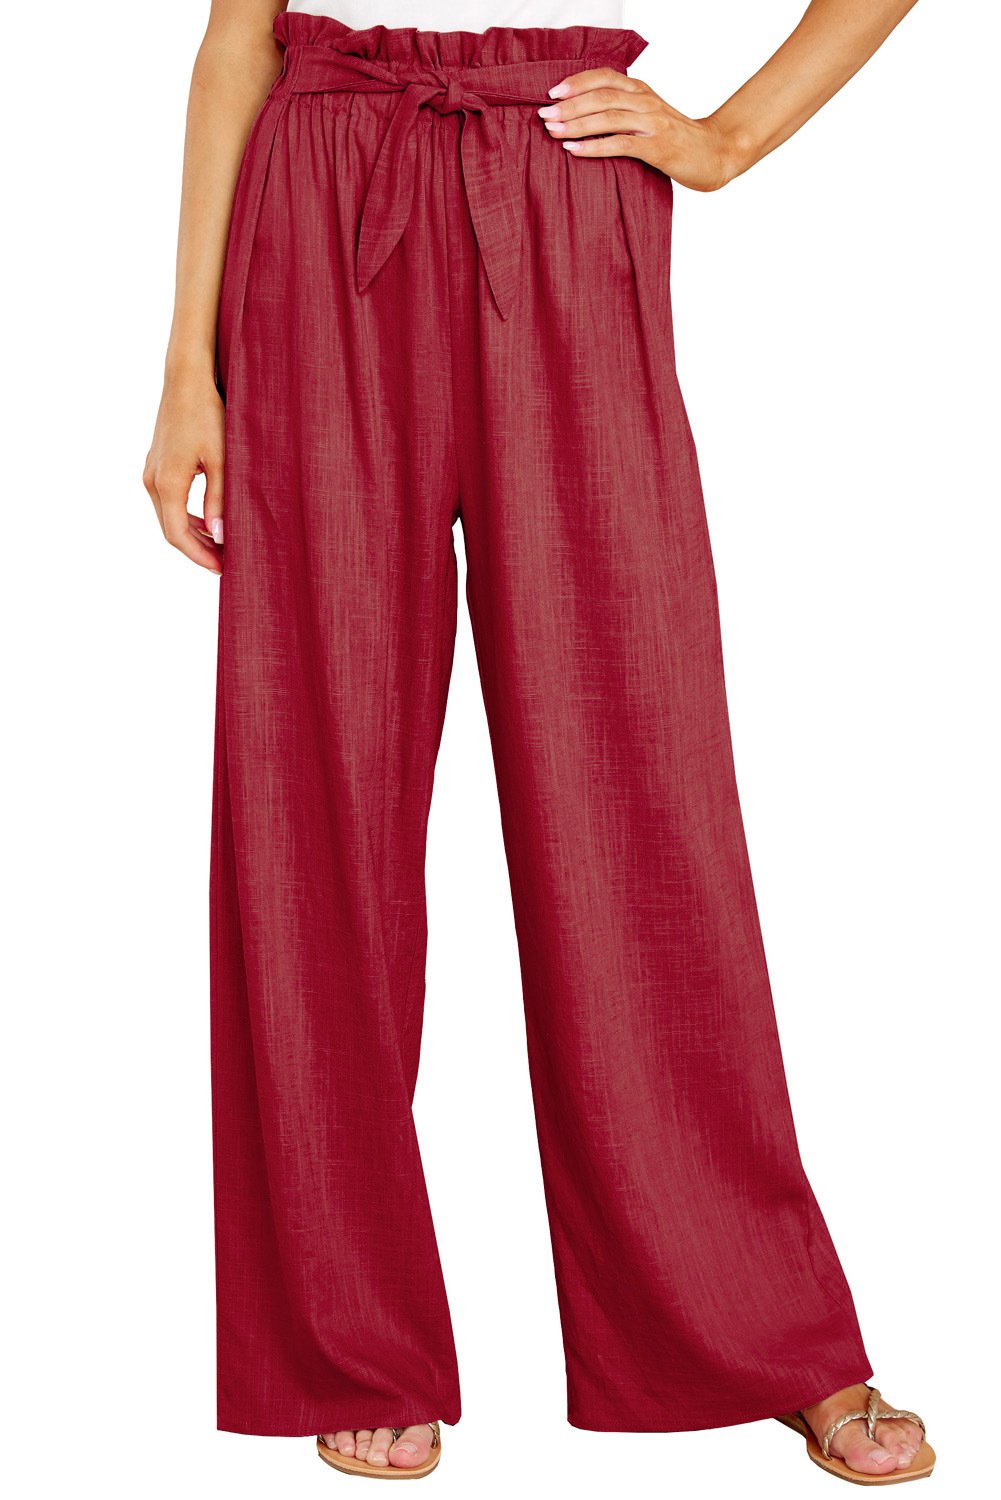 Casual Women Linen Long Pants-Wine Red-S-Free Shipping at meselling99